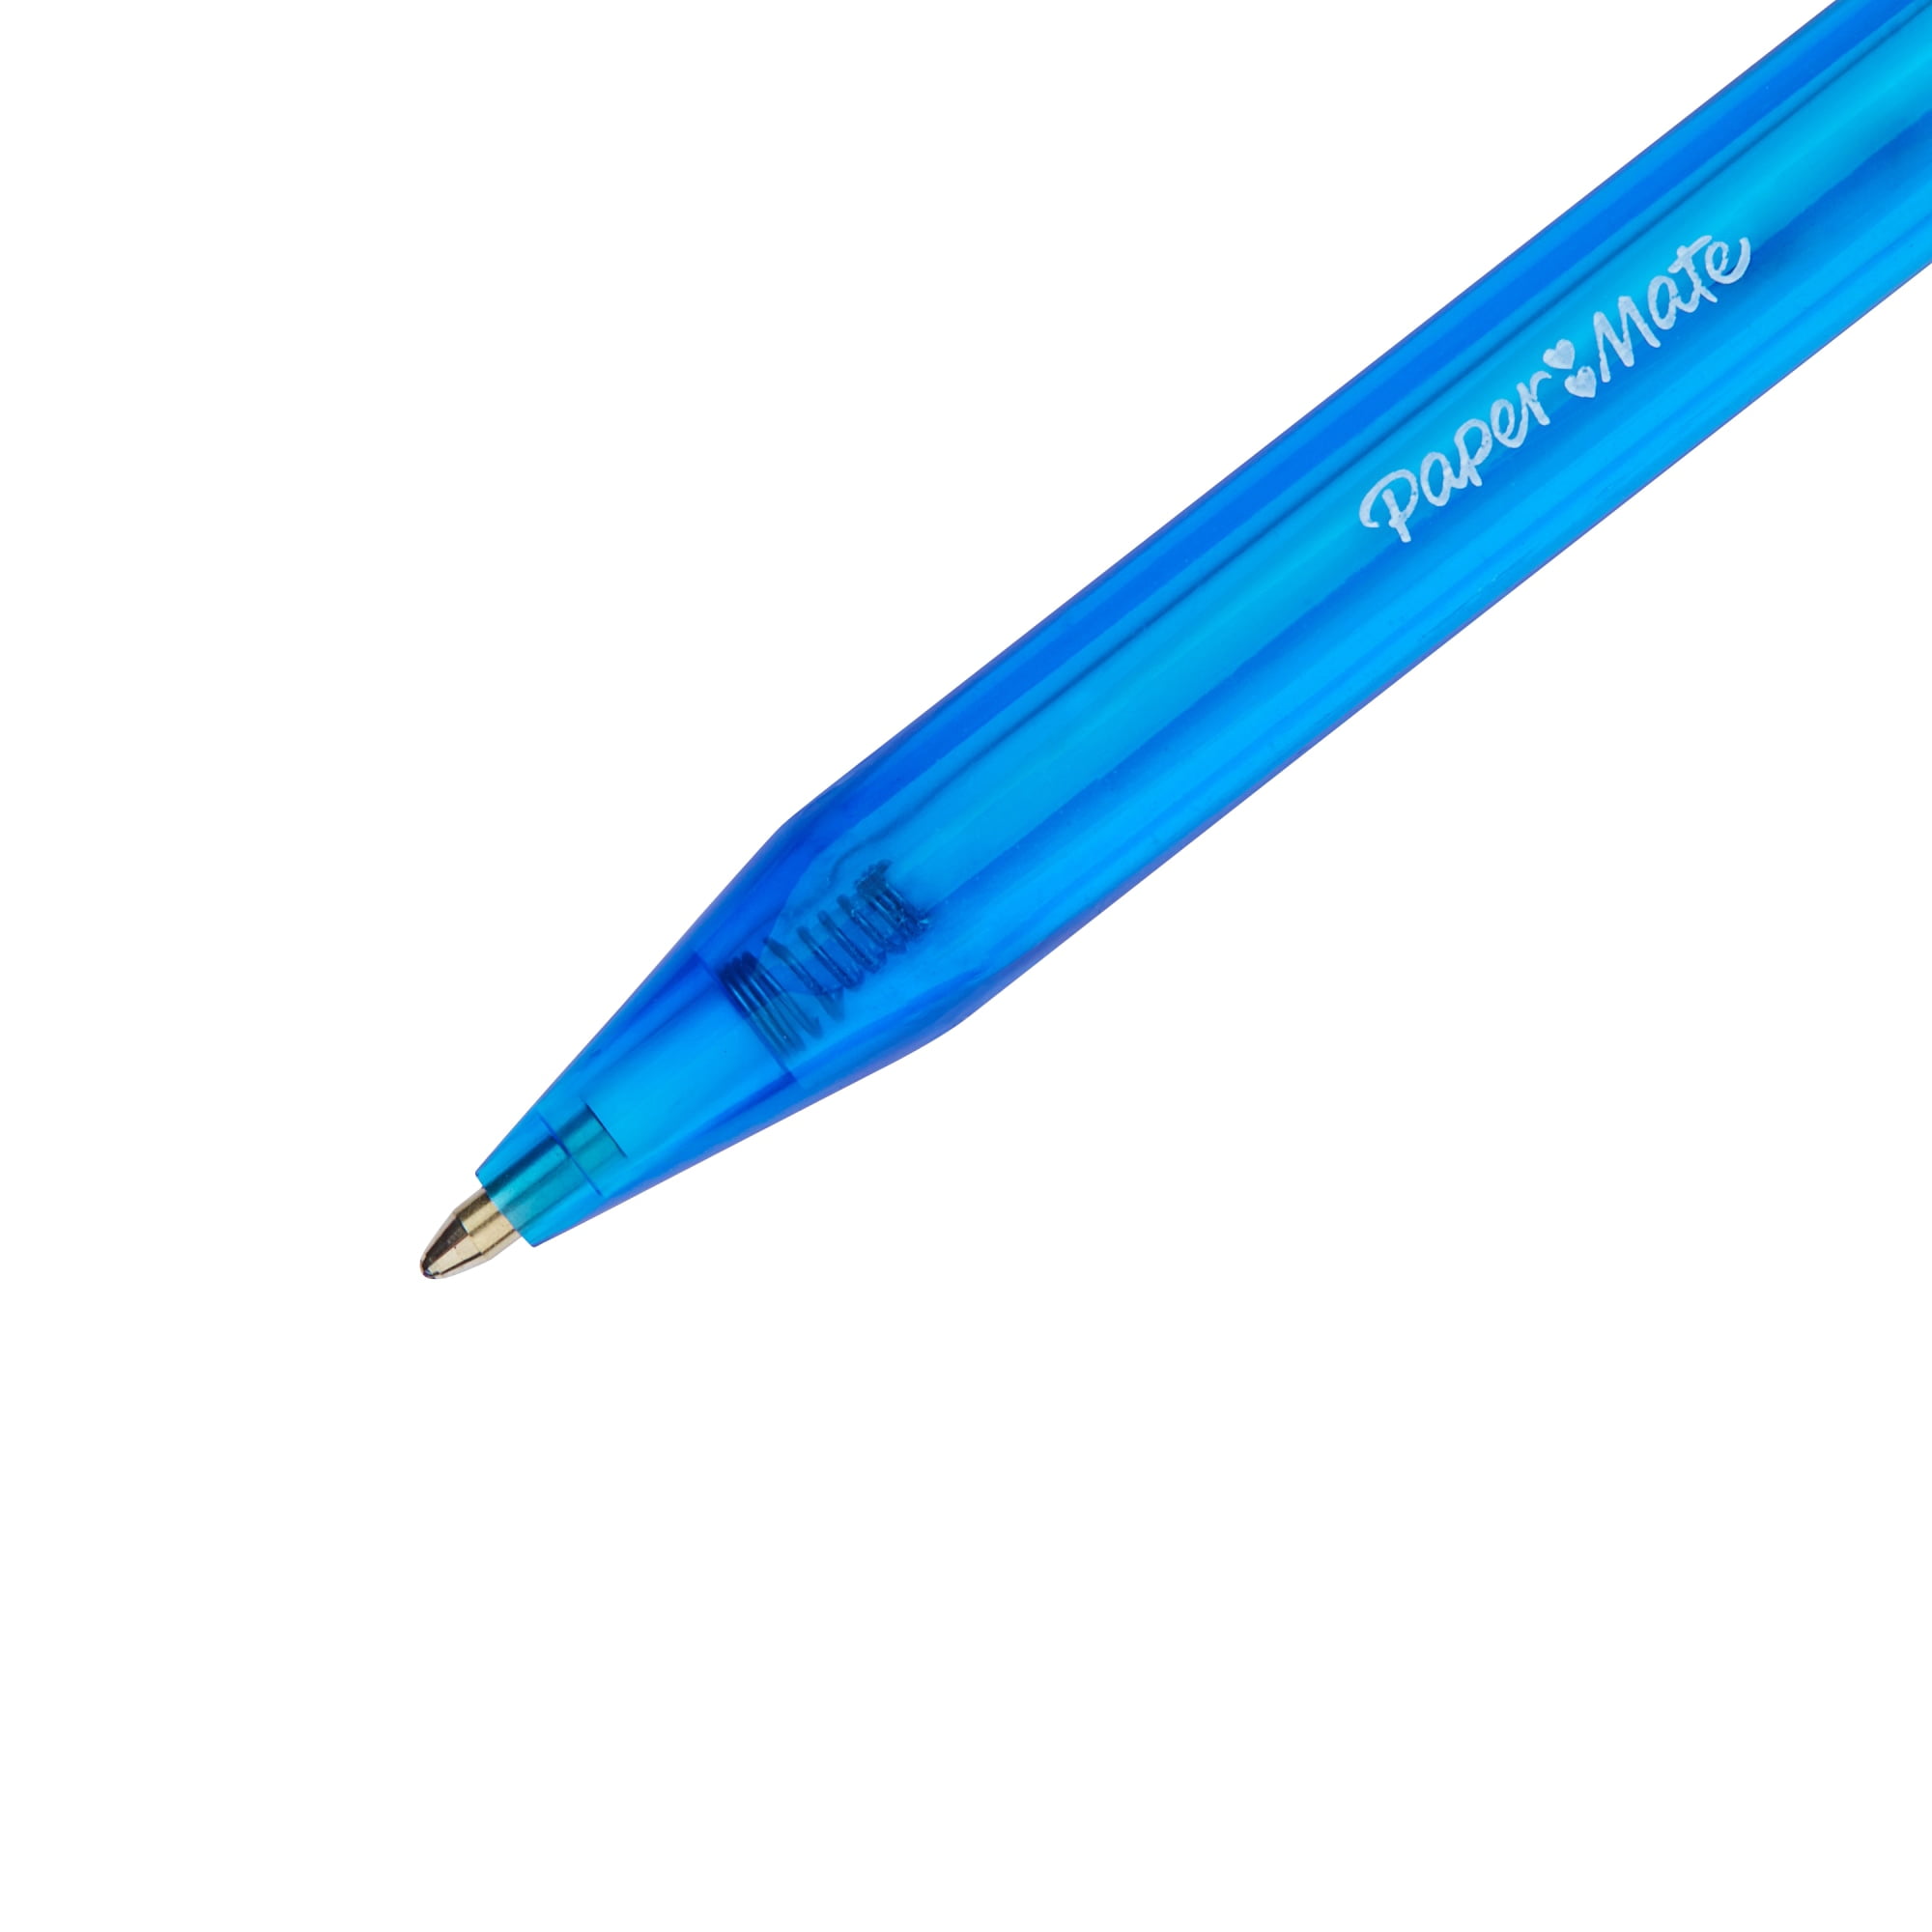 Paper Mate InkJoy 100 RT Retractable Ballpoint Pen, 1.0mm, Blue Ink, 12pc 